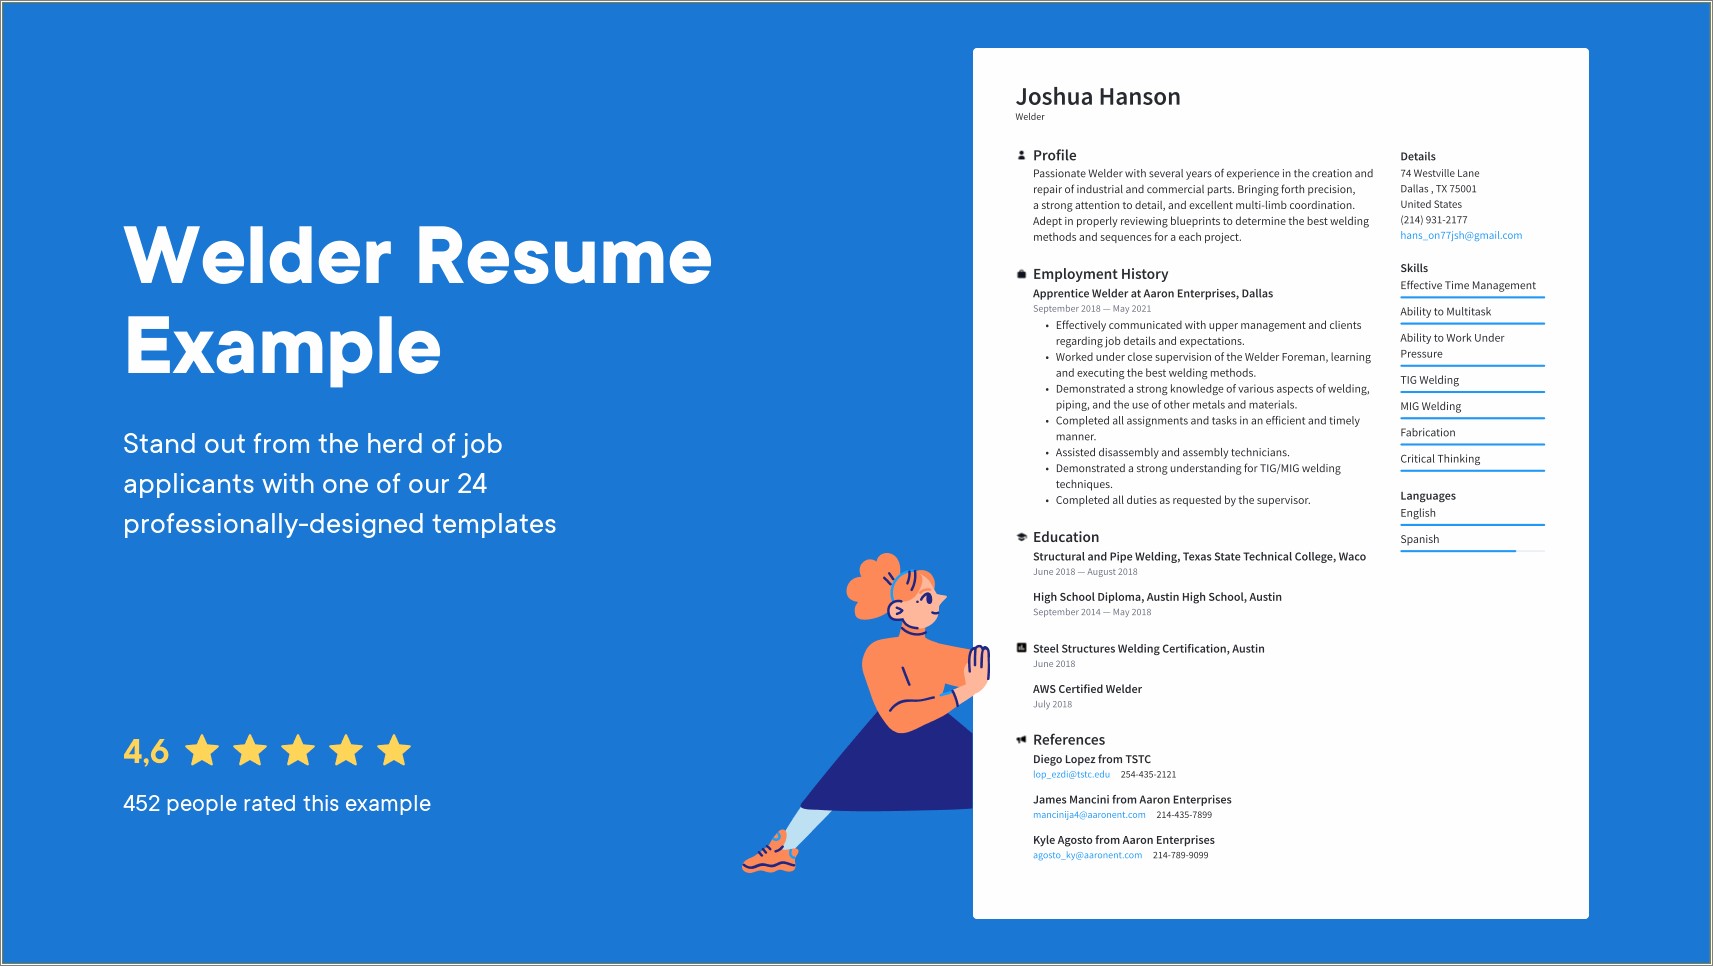 Always Wiling To Work Overtime In Resume